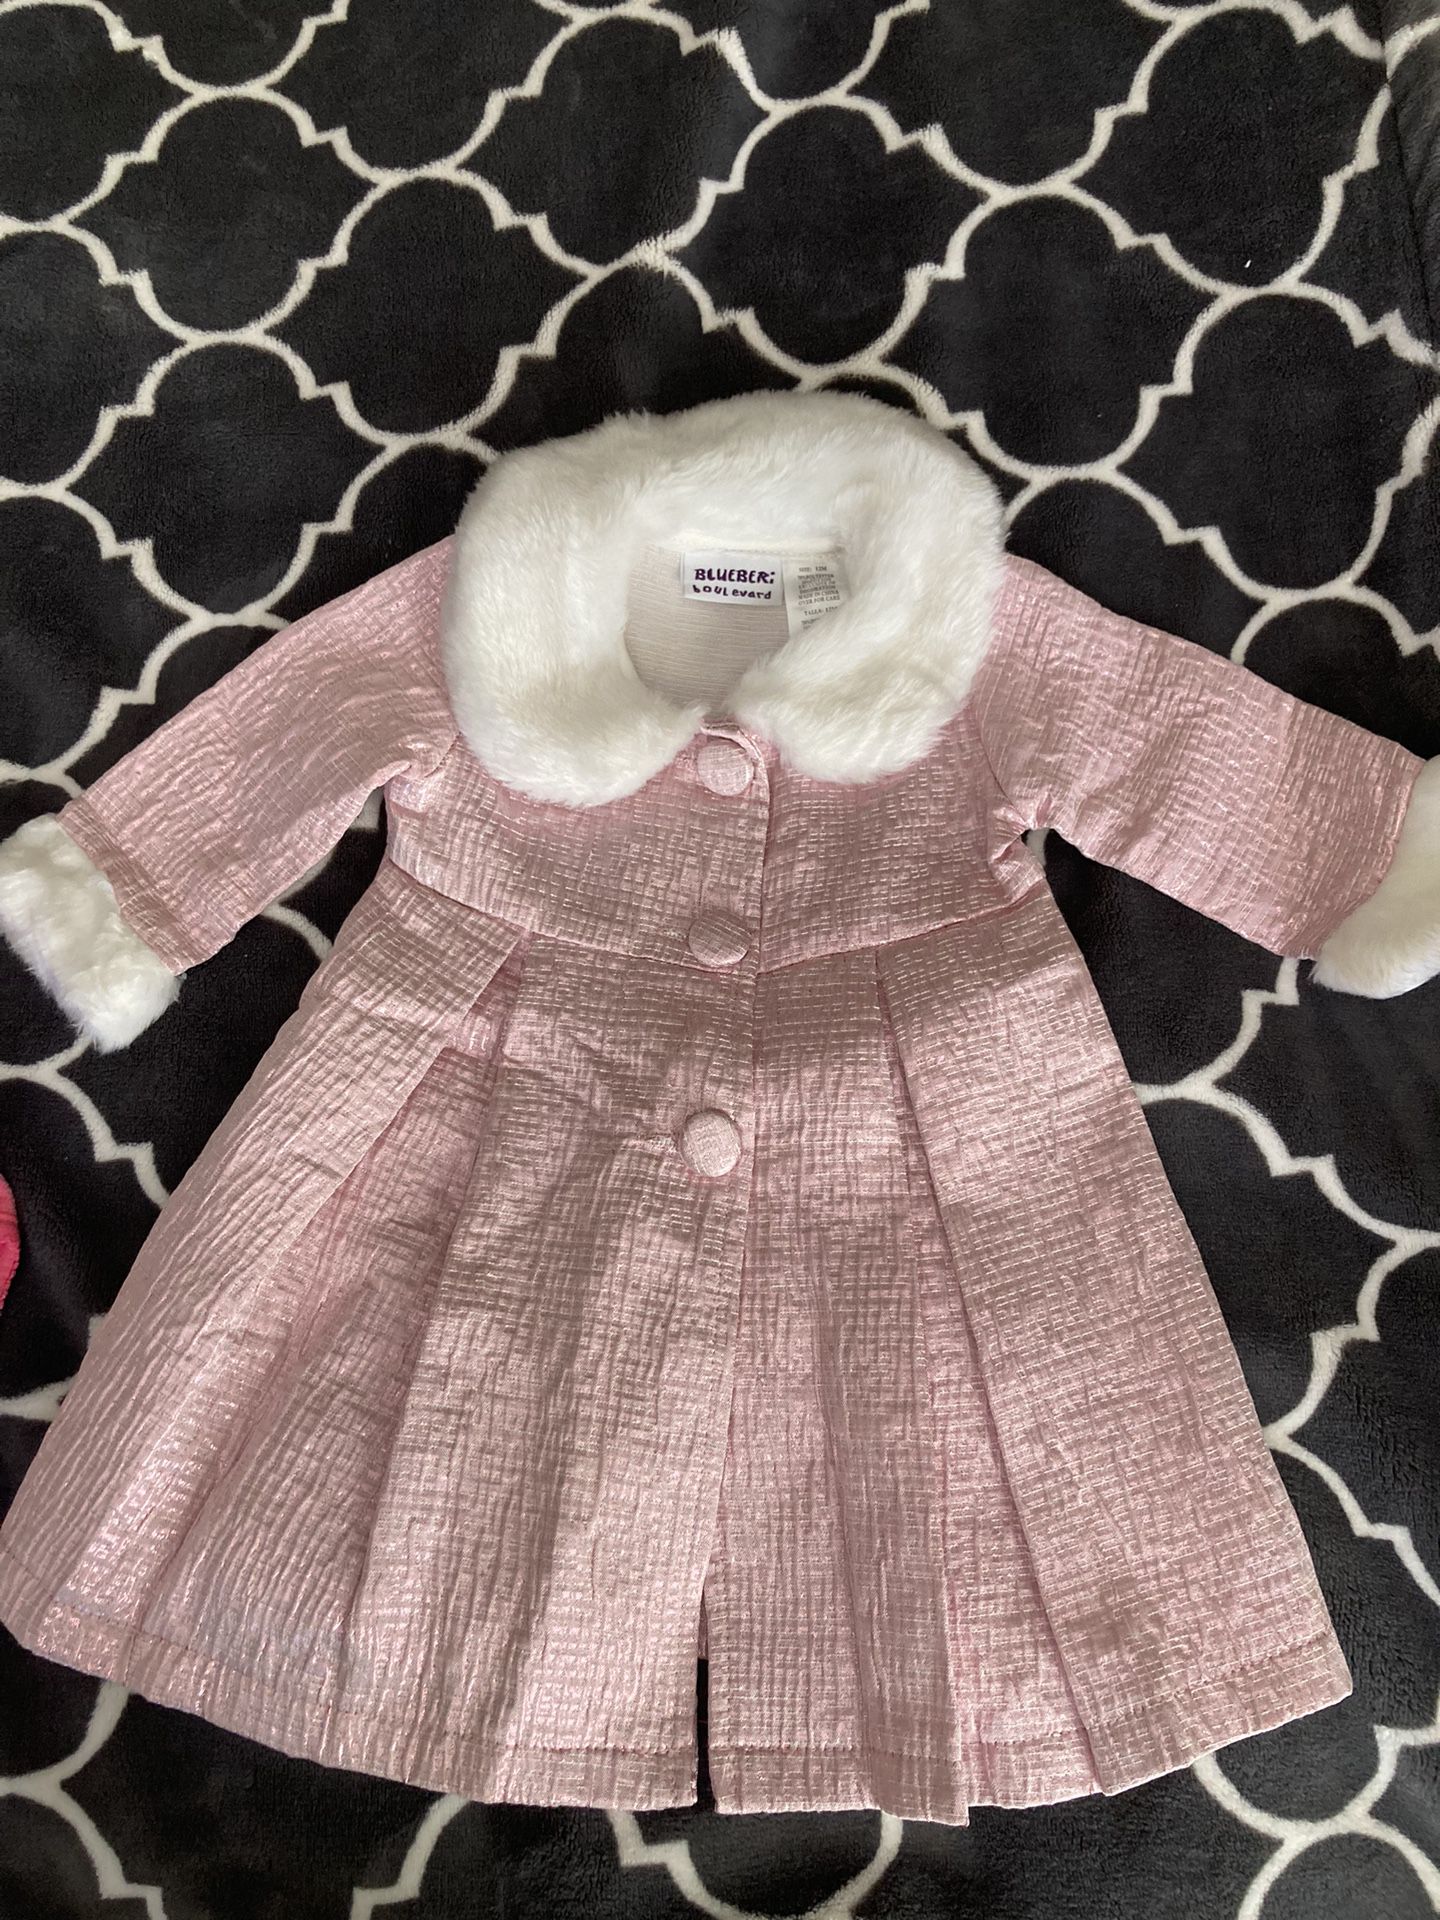 PRICE DROP - Baby Girl Pink Spring Coat - Size 12 Months  By Blueberi Boulevard